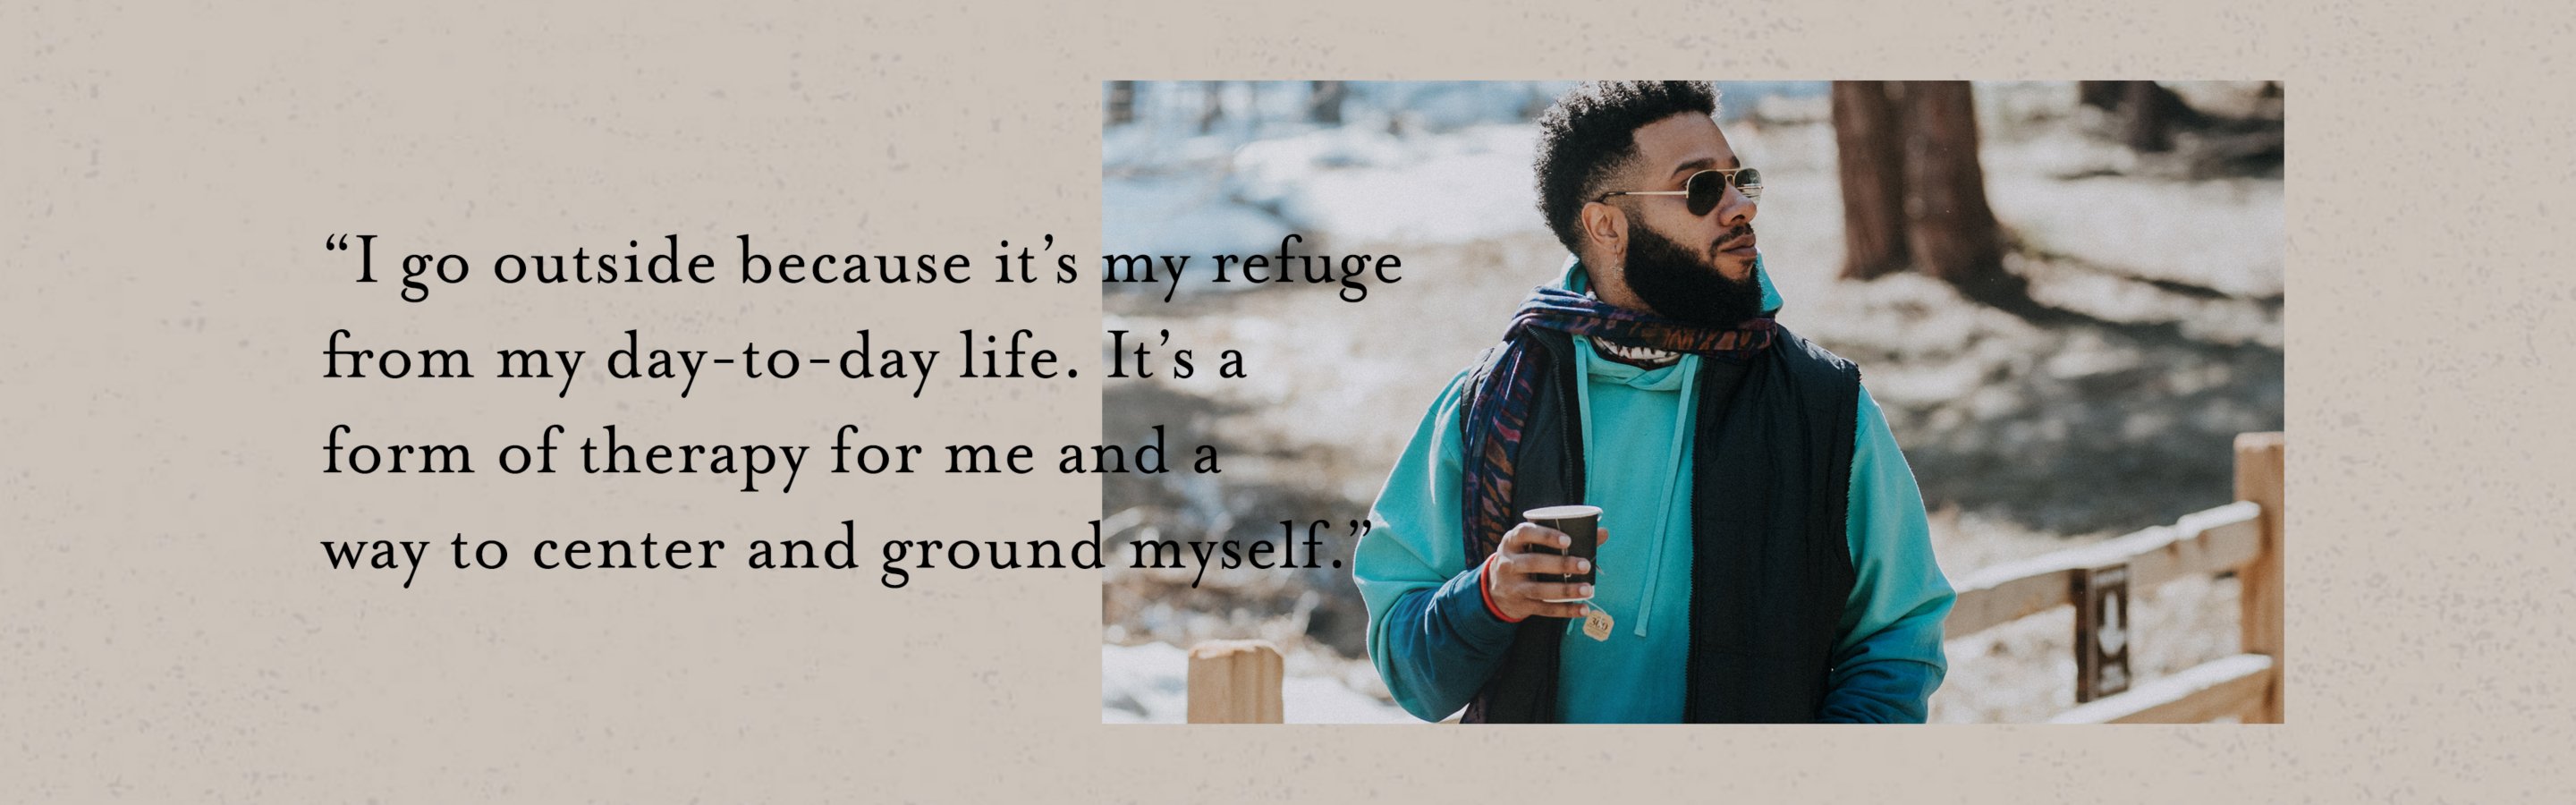 I go outside because it's my refuge from my day-to-day life. It's a form of therapy for and a way to center and ground myself.